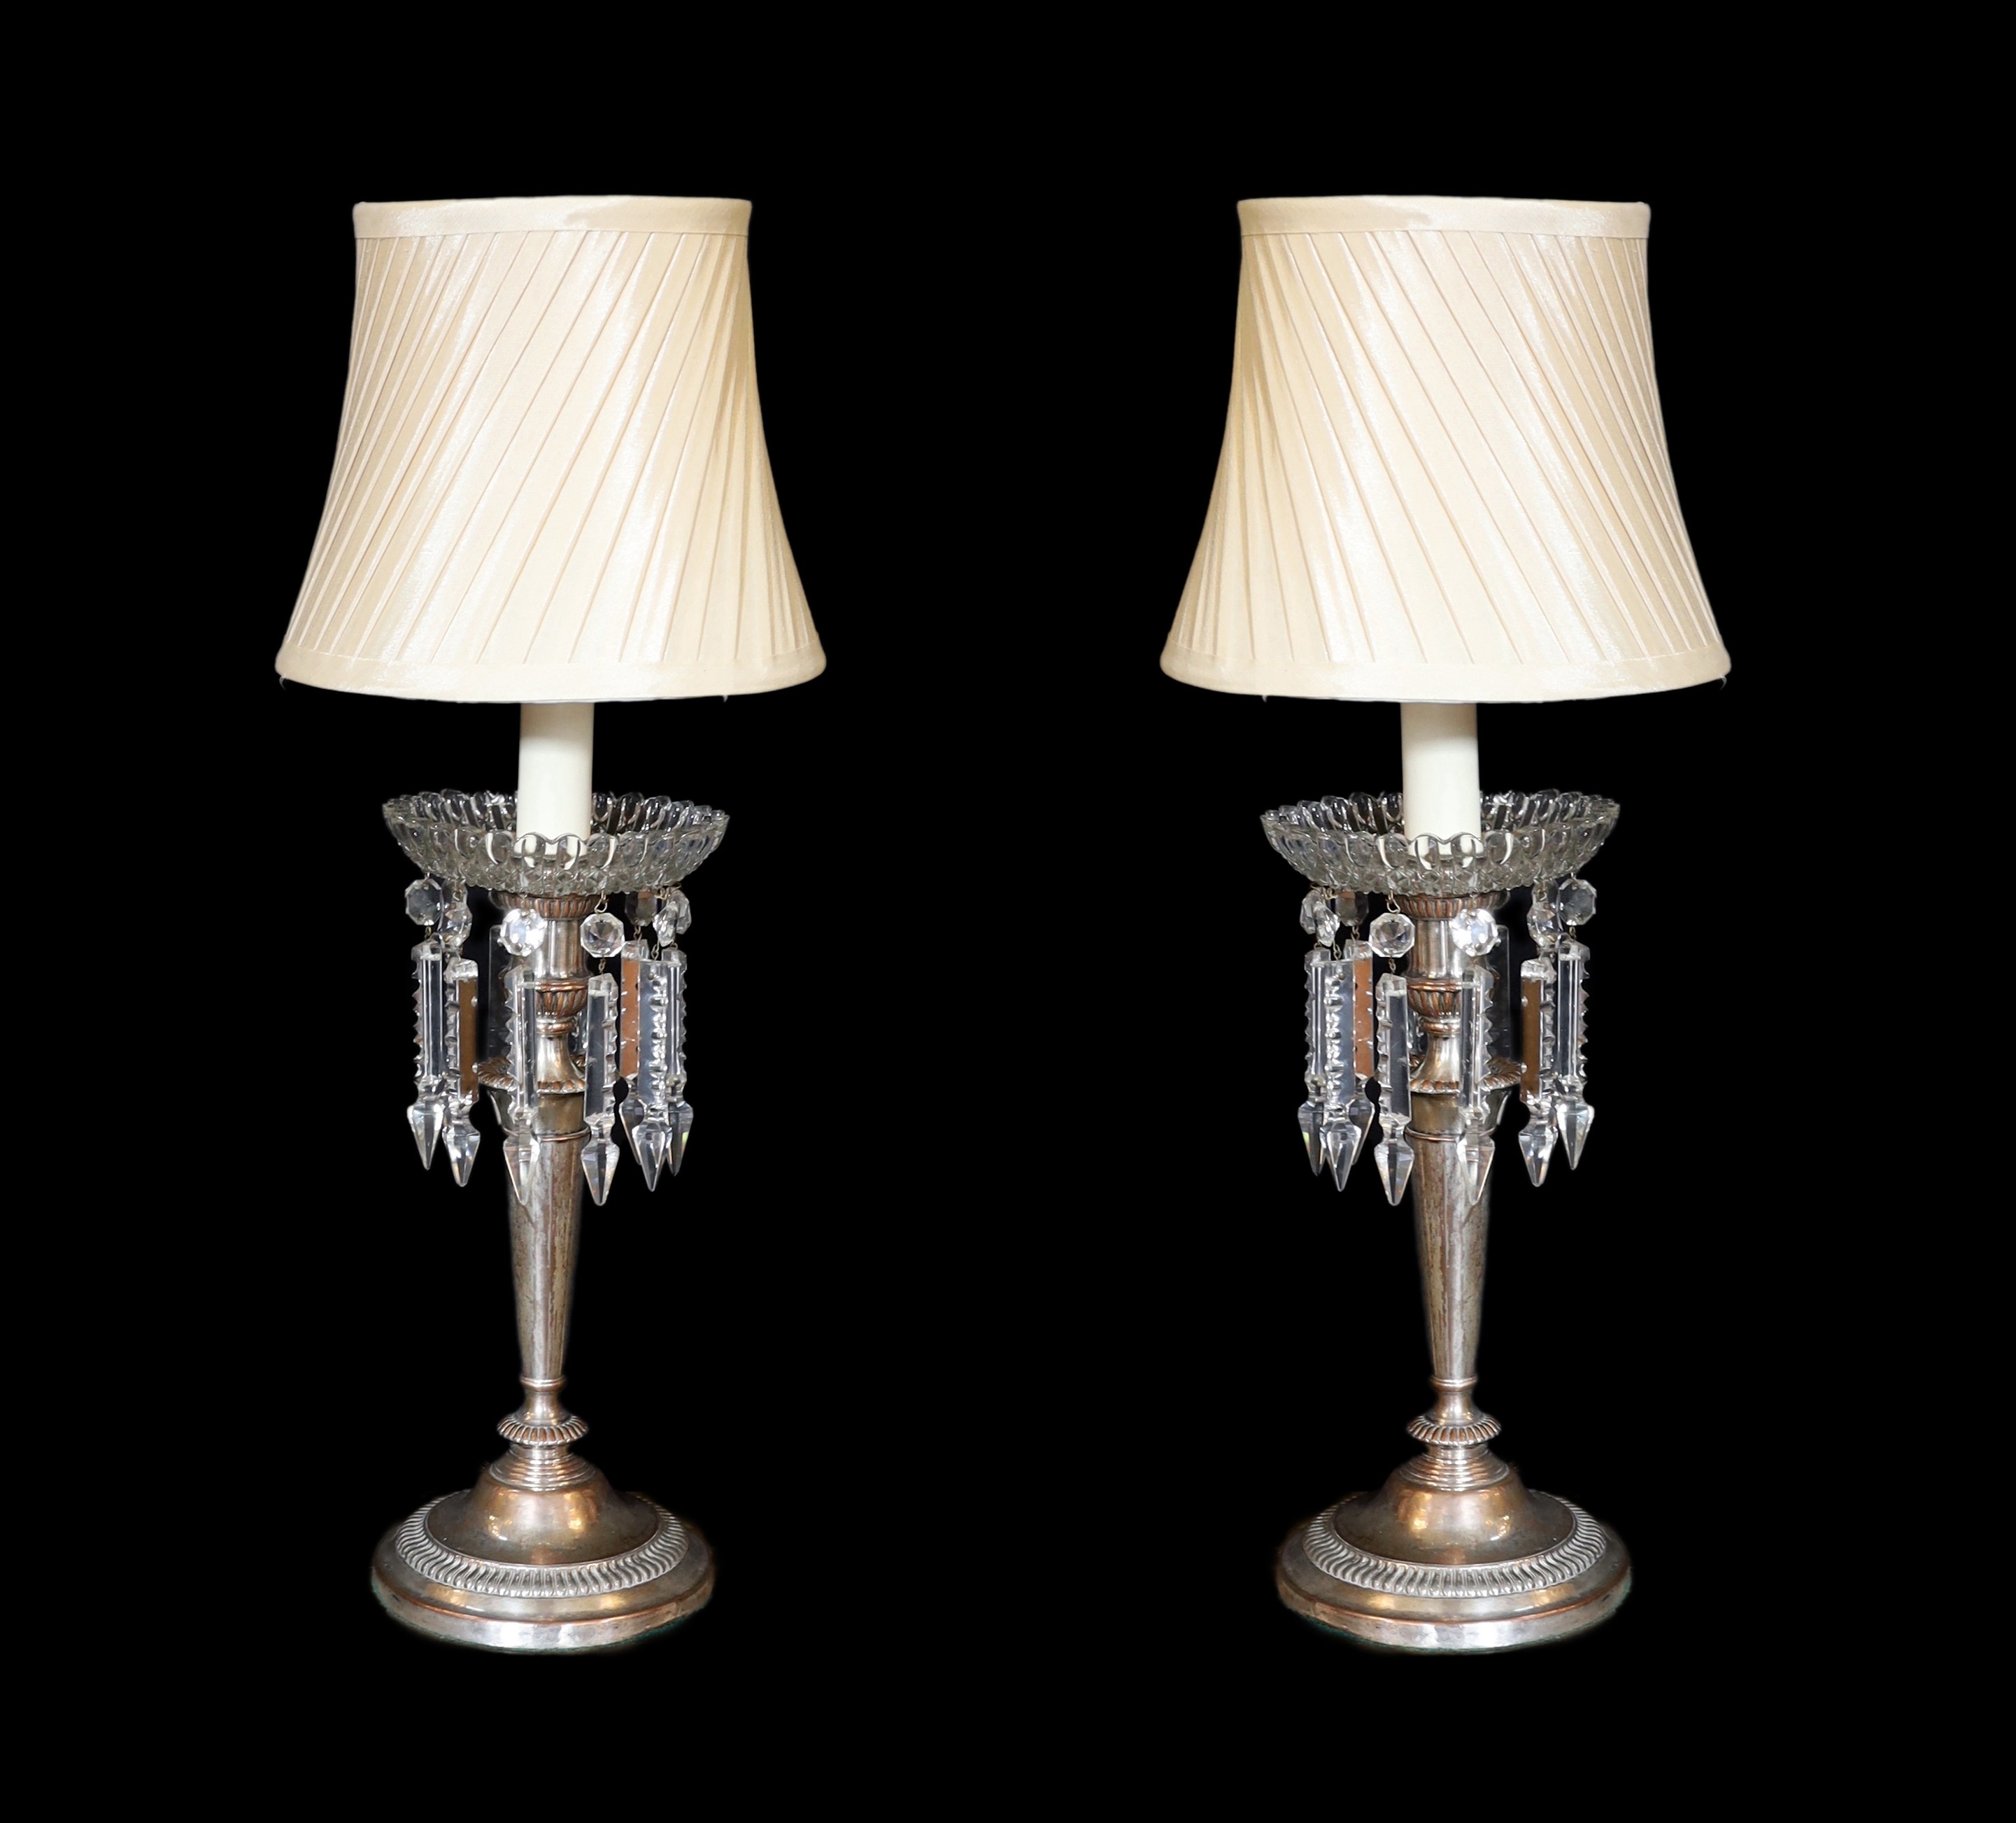 A pair of old Sheffield plate table lamps with moulded and cut glass lustre drops, height 44cm